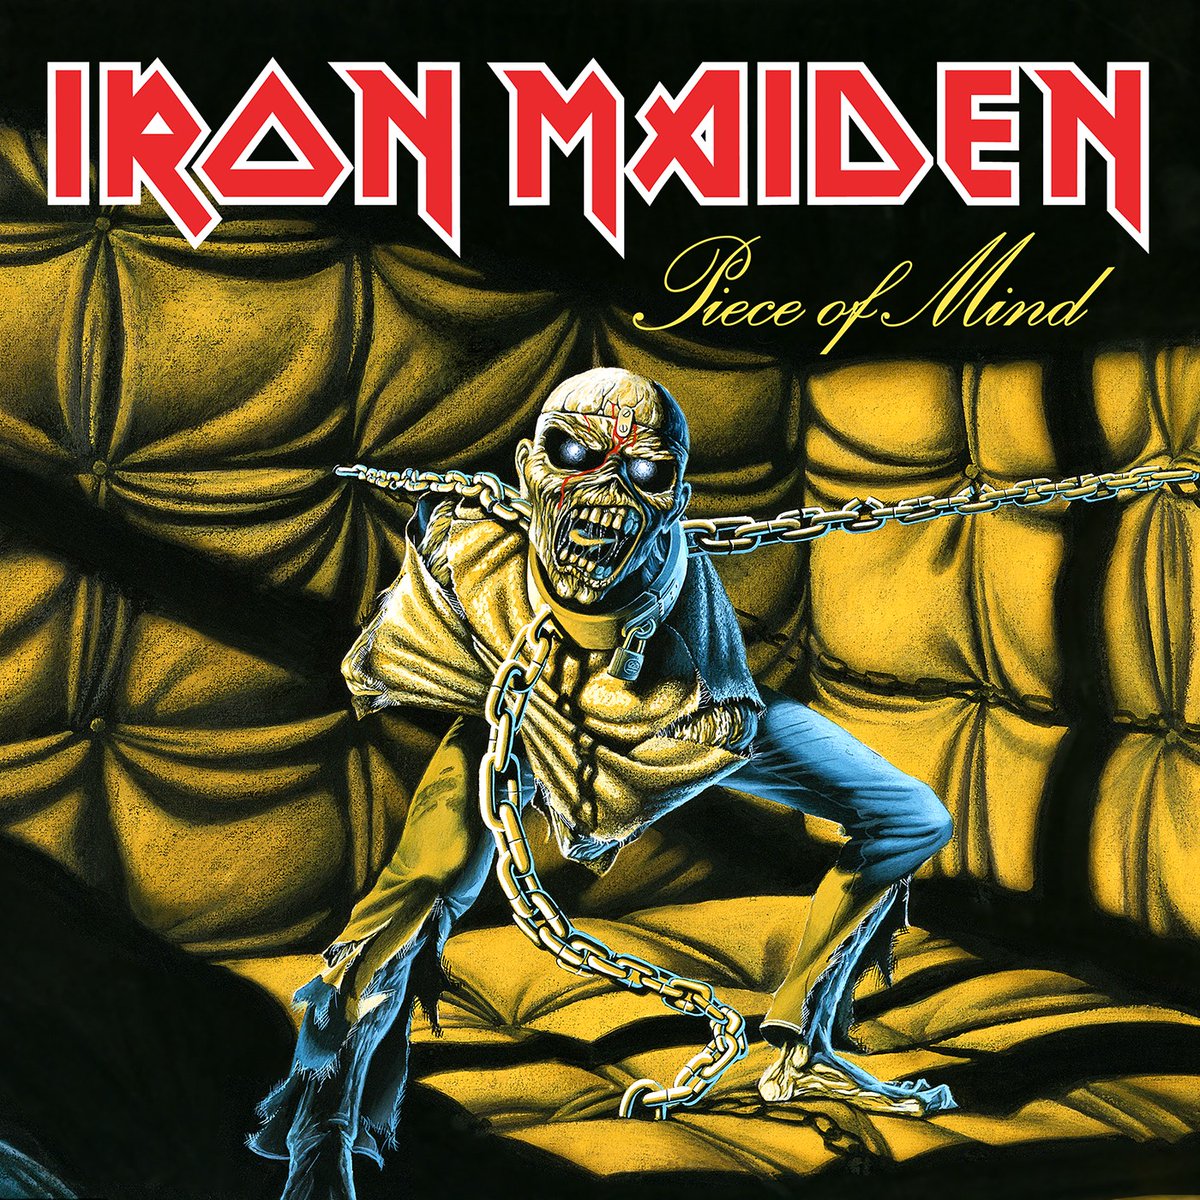 Piece of Mind was released 41 years ago today! What's your favourite moment on the album? #IronMaiden #PieceOfMind